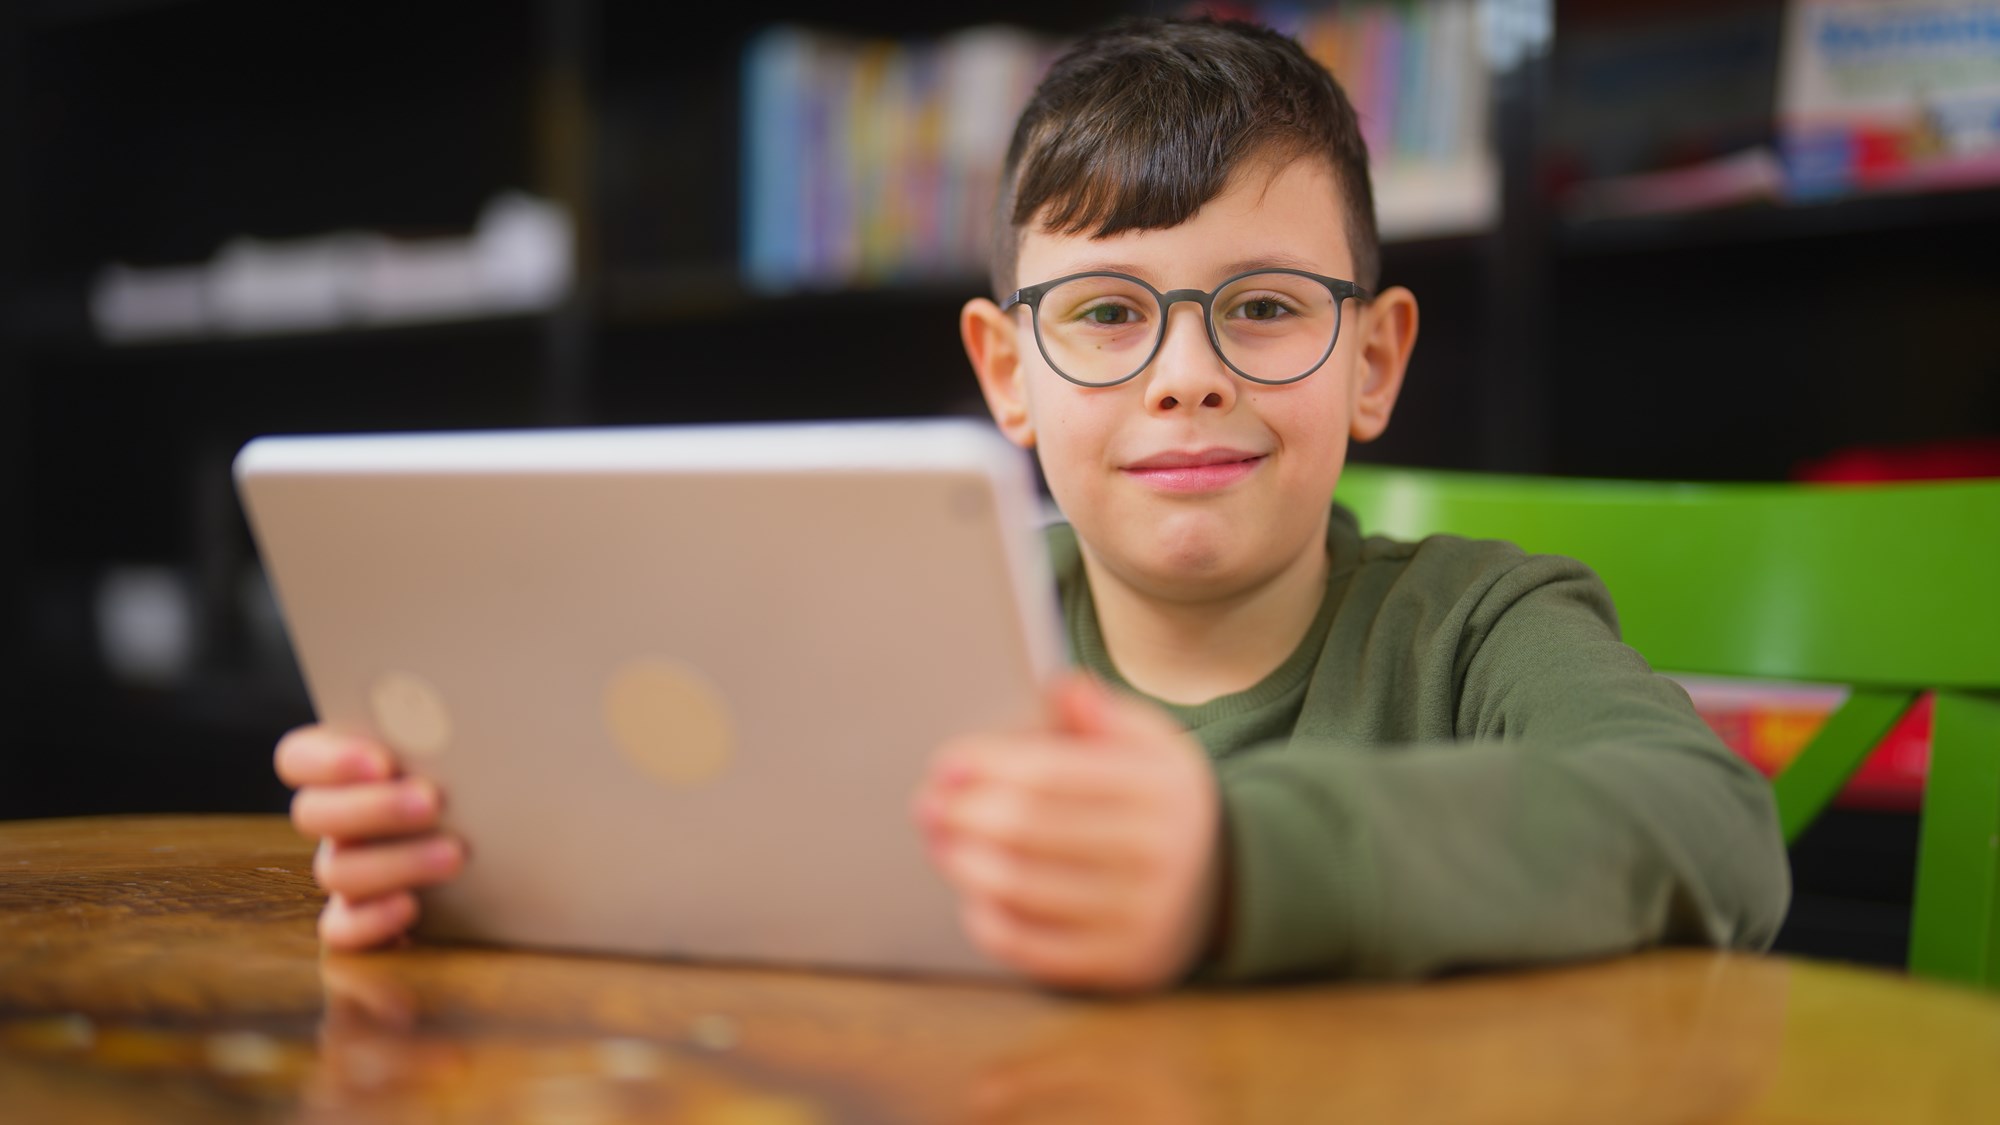 Child with Glasses Holding a Tablet and Looking Forward